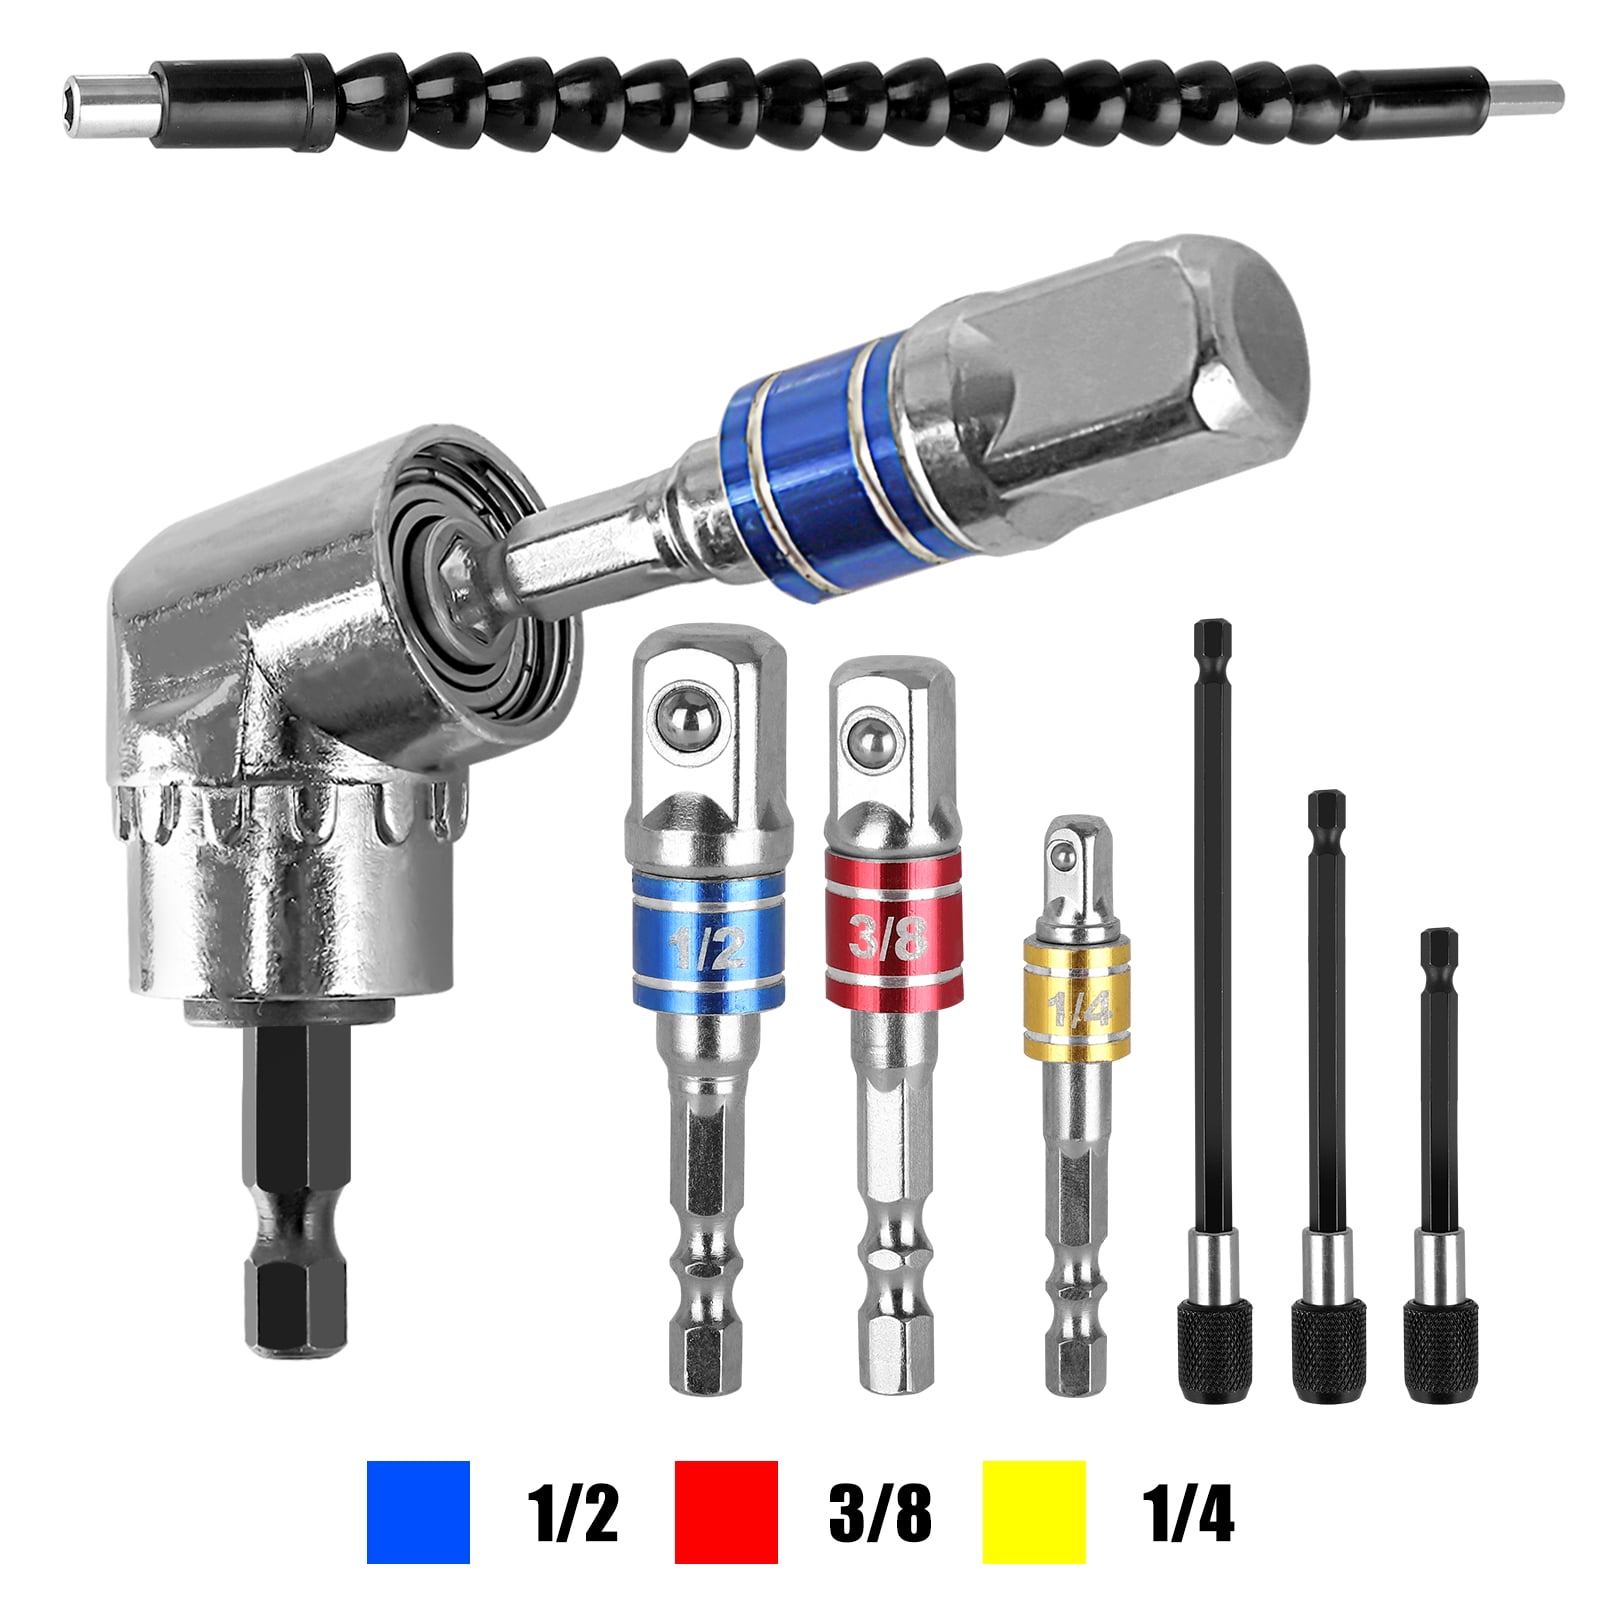 8pcs Right Angle Drill 105 Degree Driver Extension Power Socket Holder Adapter Head Post Power Tool Accessories Set 